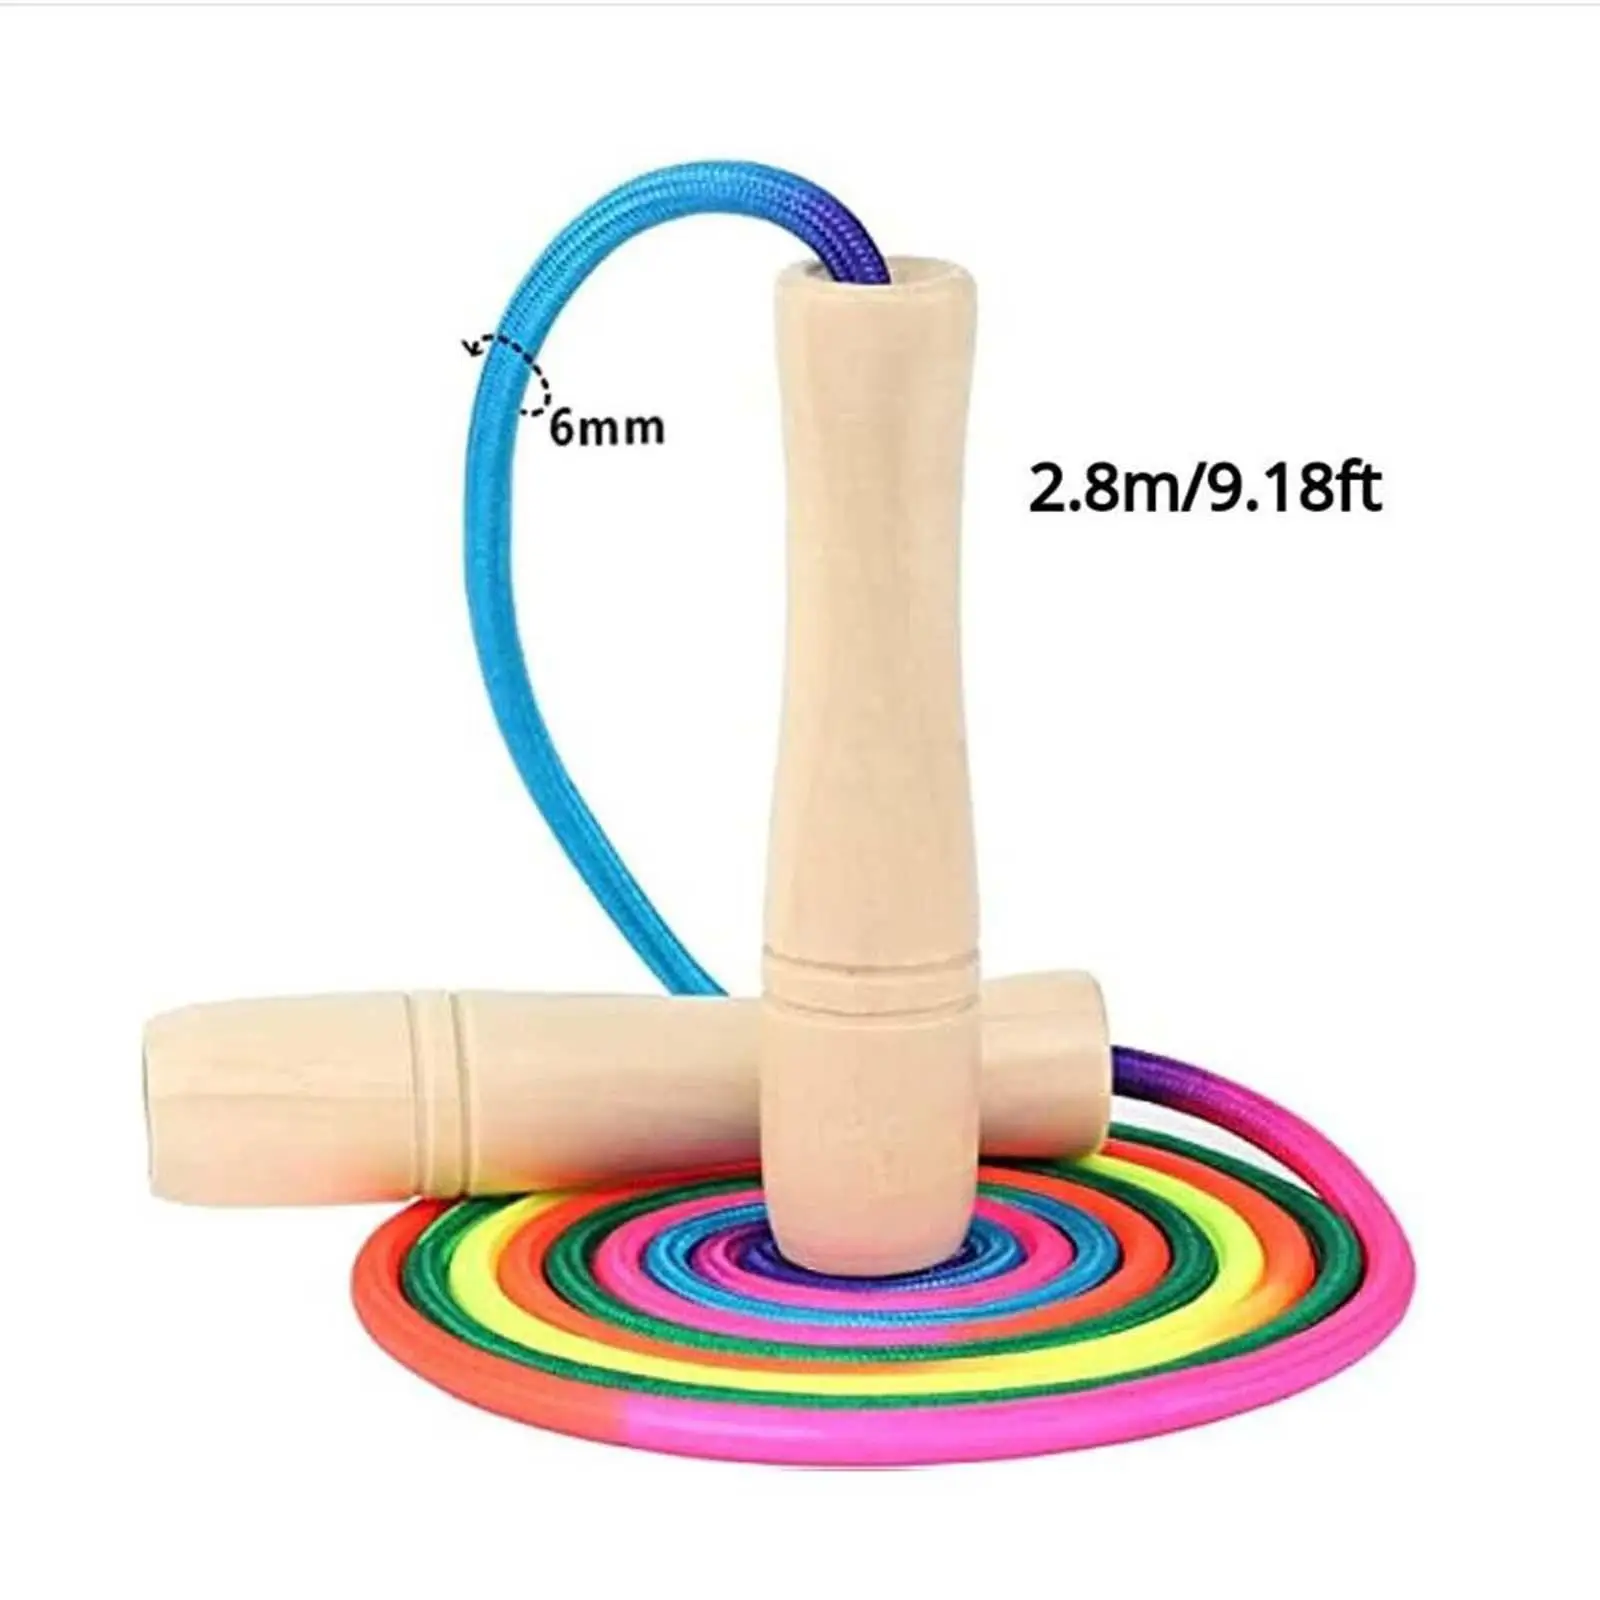 Jump Rope for Kids Adults, 2.8M Adjustable Rainbow Jumping Rope, Skipping Rope for Workout Endurance Training Outdoor Sports